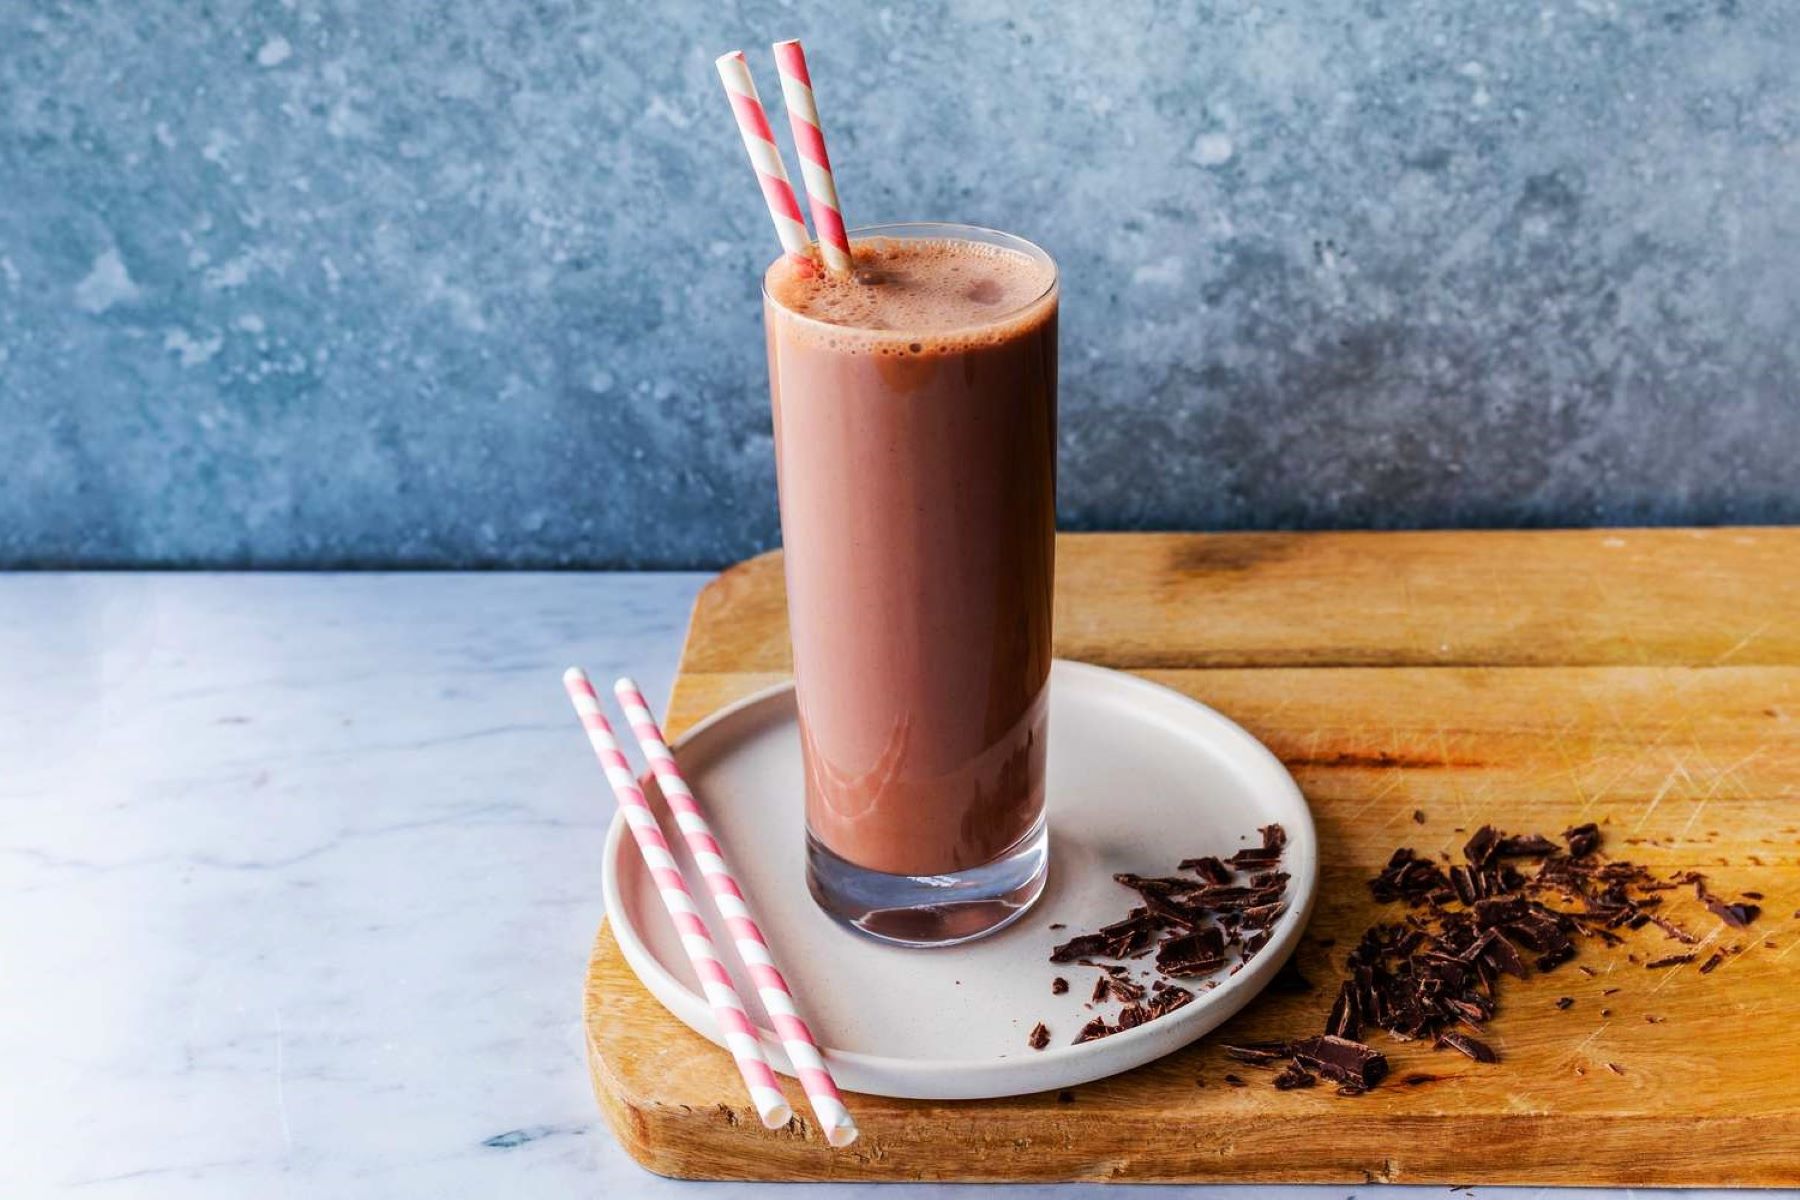 Top 4 Chocolate Milk Drinks For Post-Run Recovery